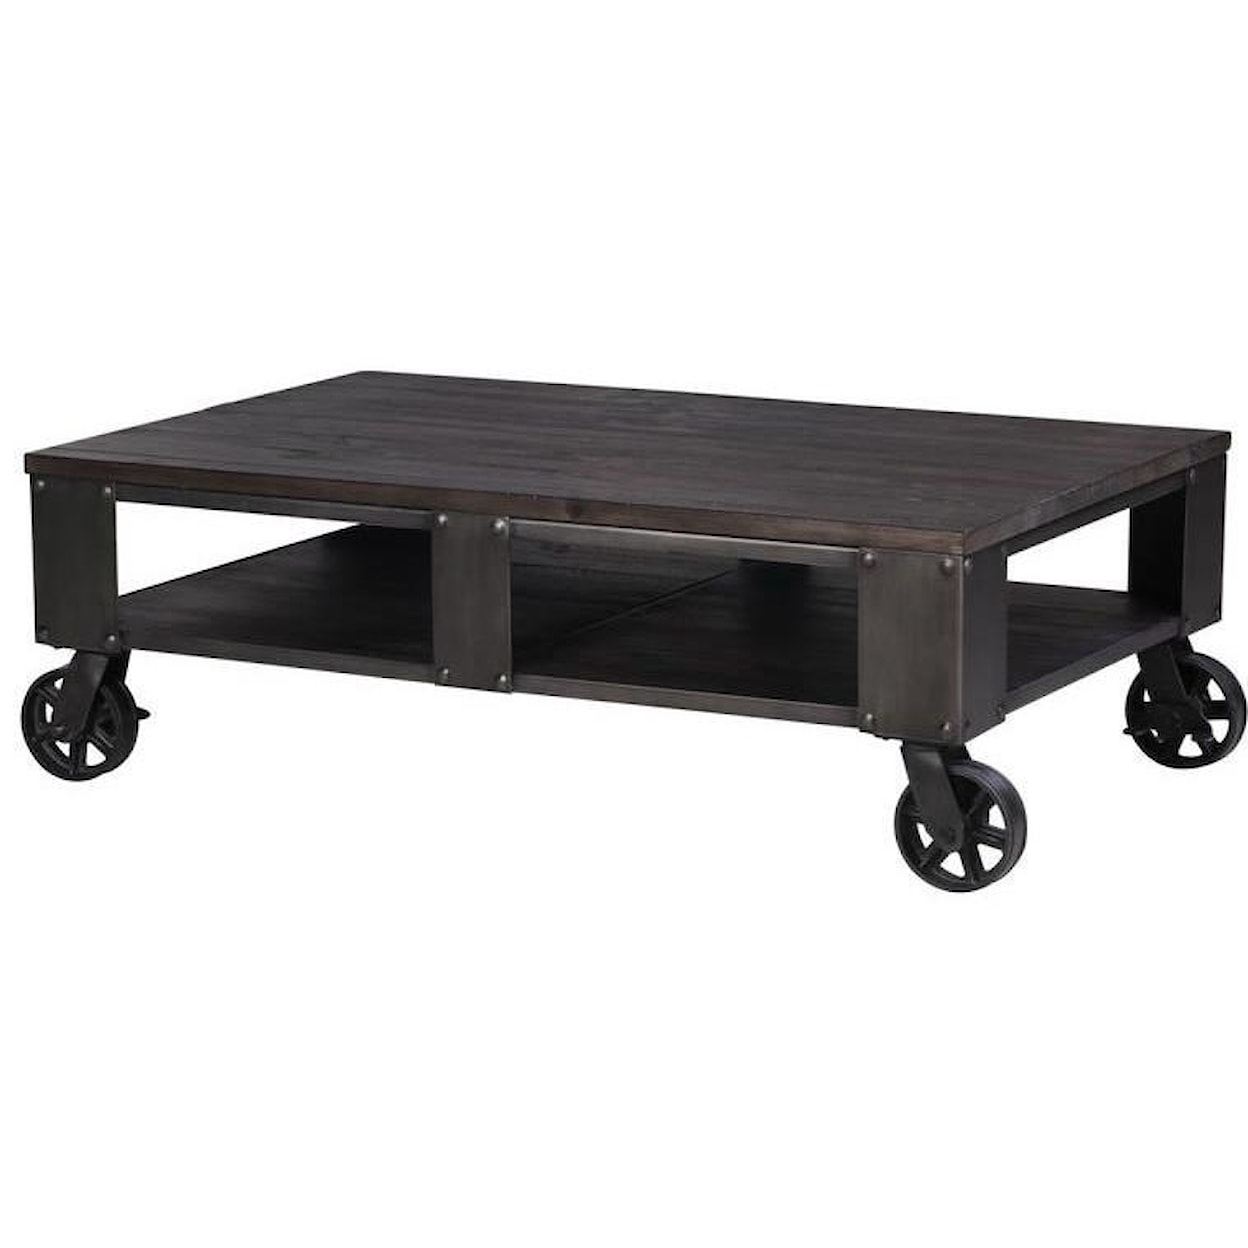 Magnussen Home Milford Occasional Tables Rectangular Cocktail Table